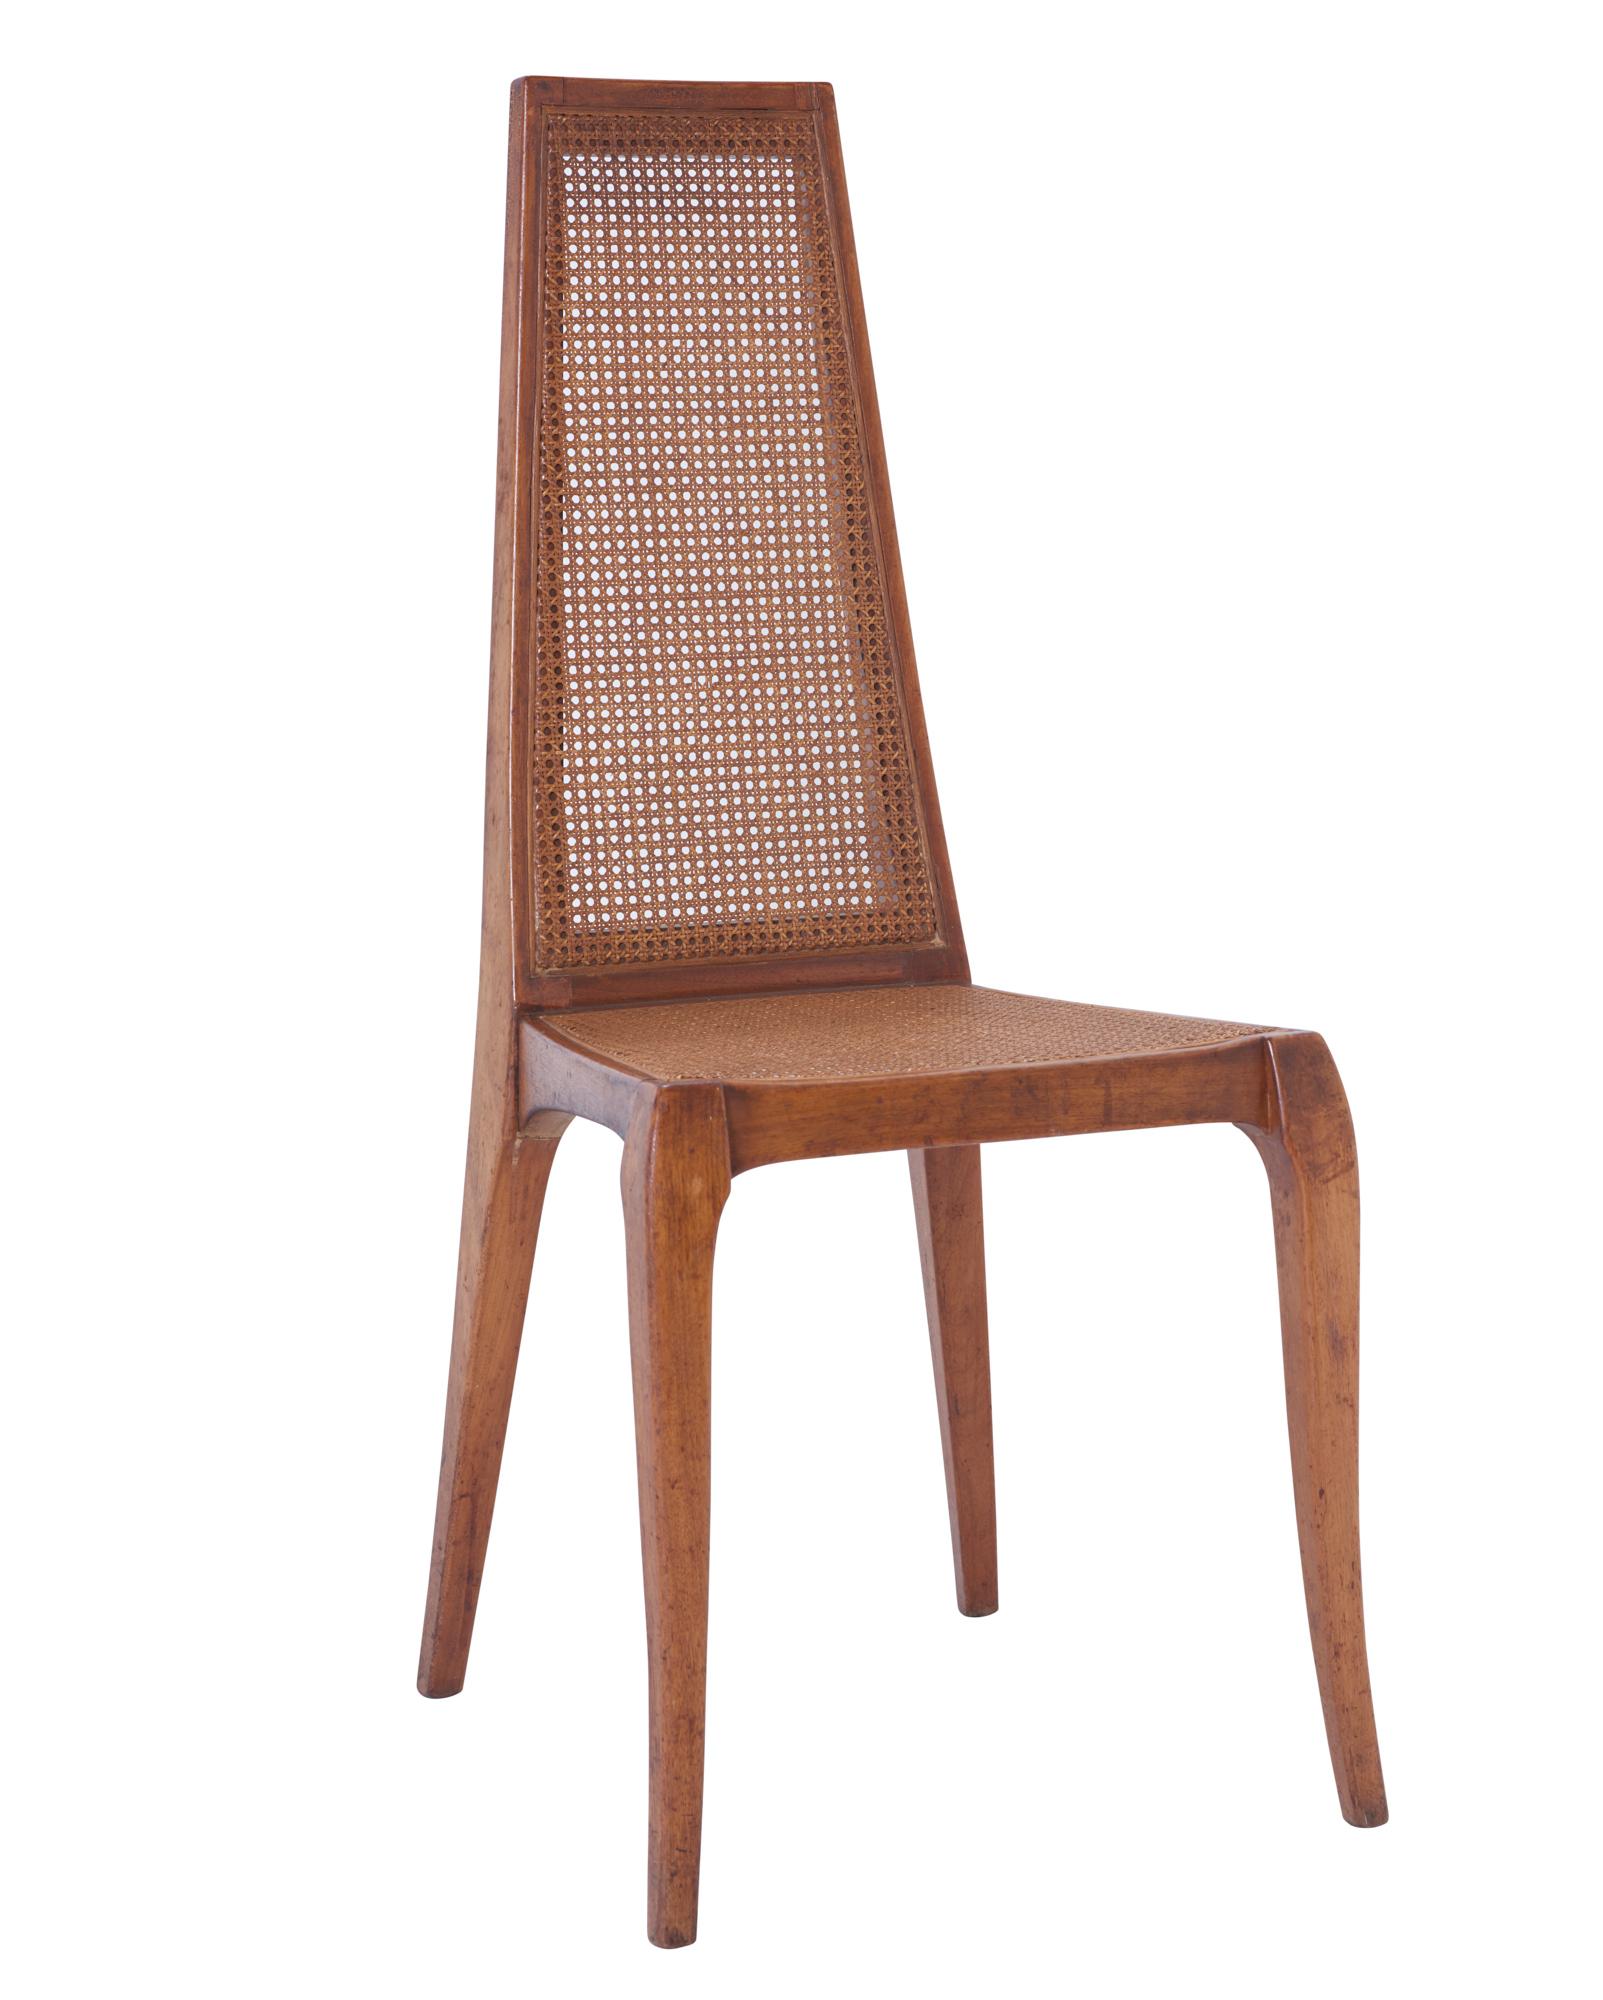 Pair of Mid-Century Modern Caned Chairs in Walnut, circa 1960 1